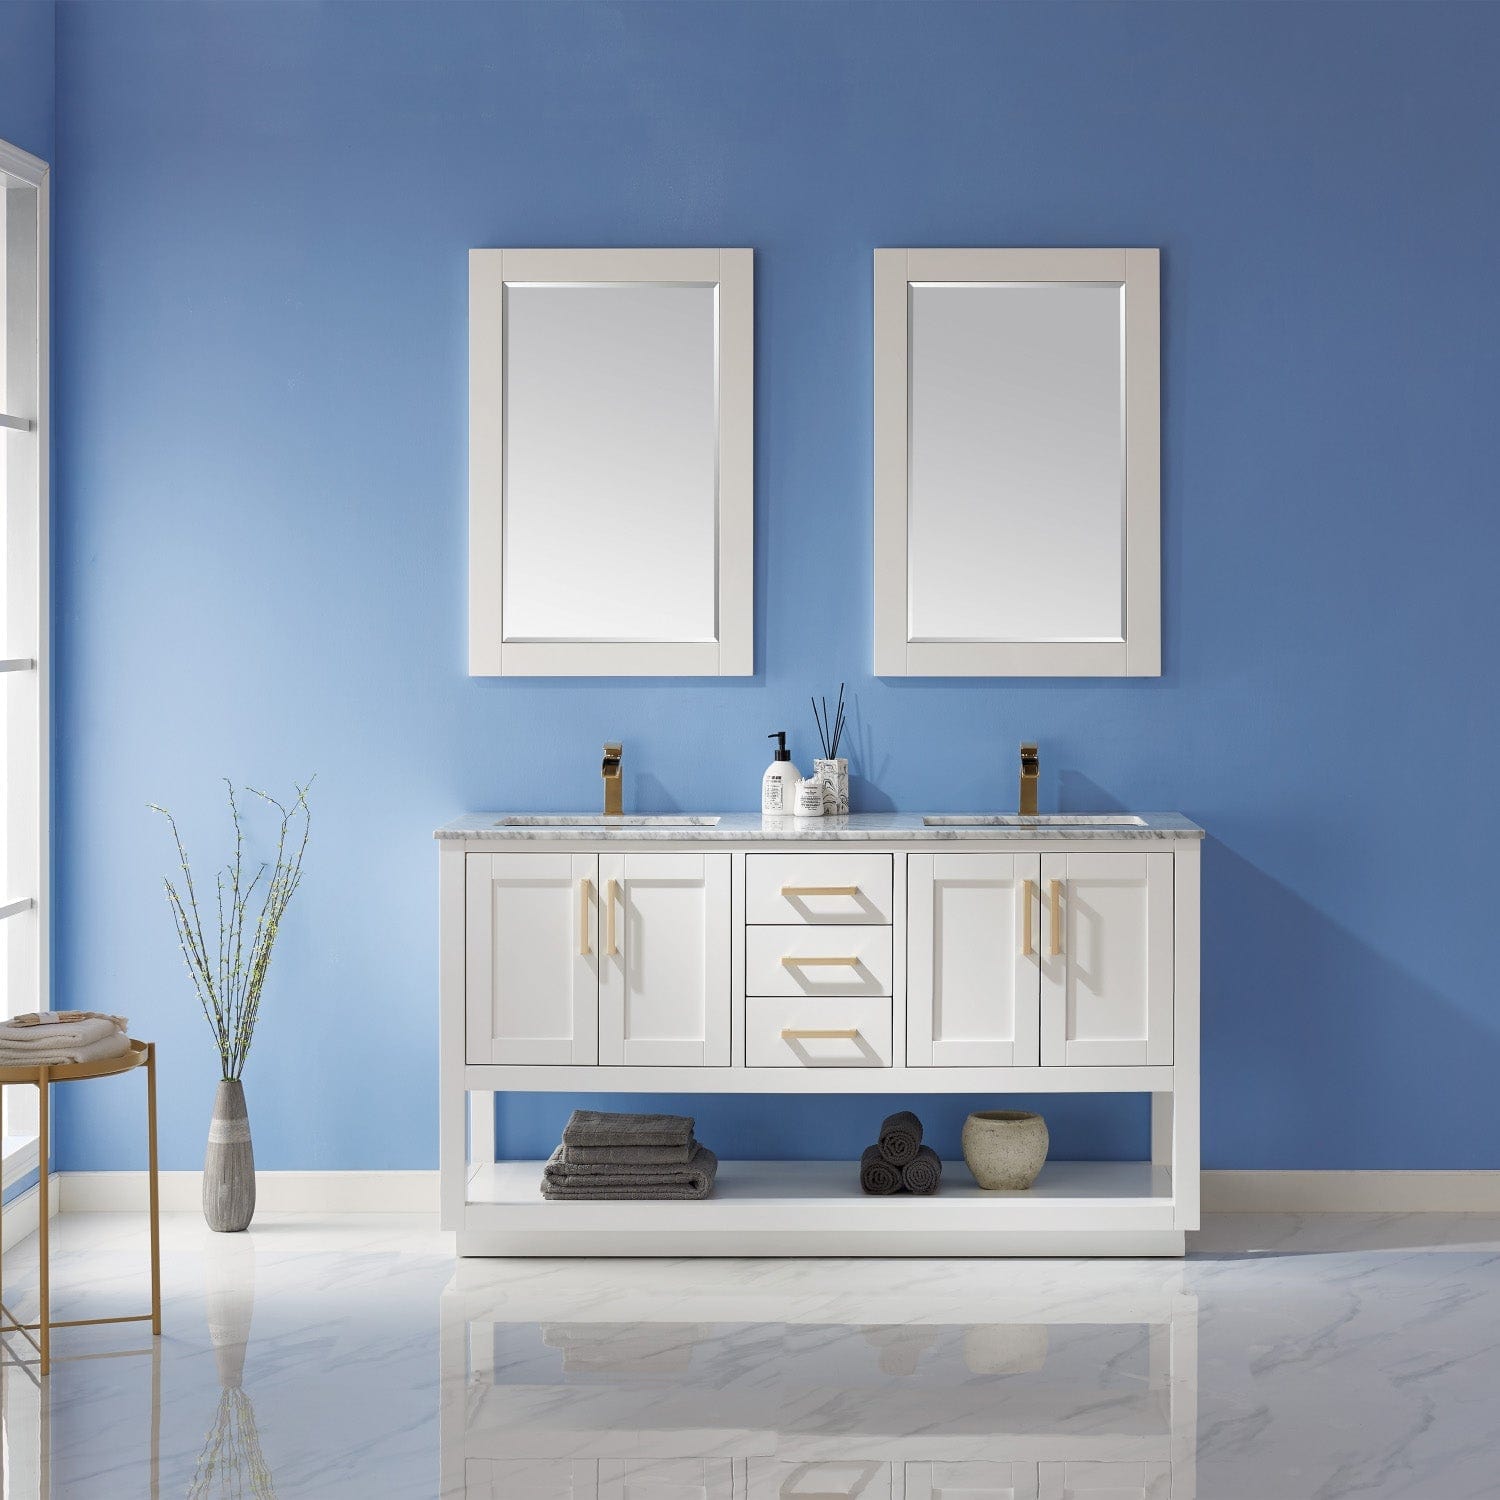 Altair Remi 60" Double Bathroom Vanity Set in White and Carrara White Marble Countertop with Mirror 532060-WH-CA - Molaix631112971553Vanity532060-WH-CA